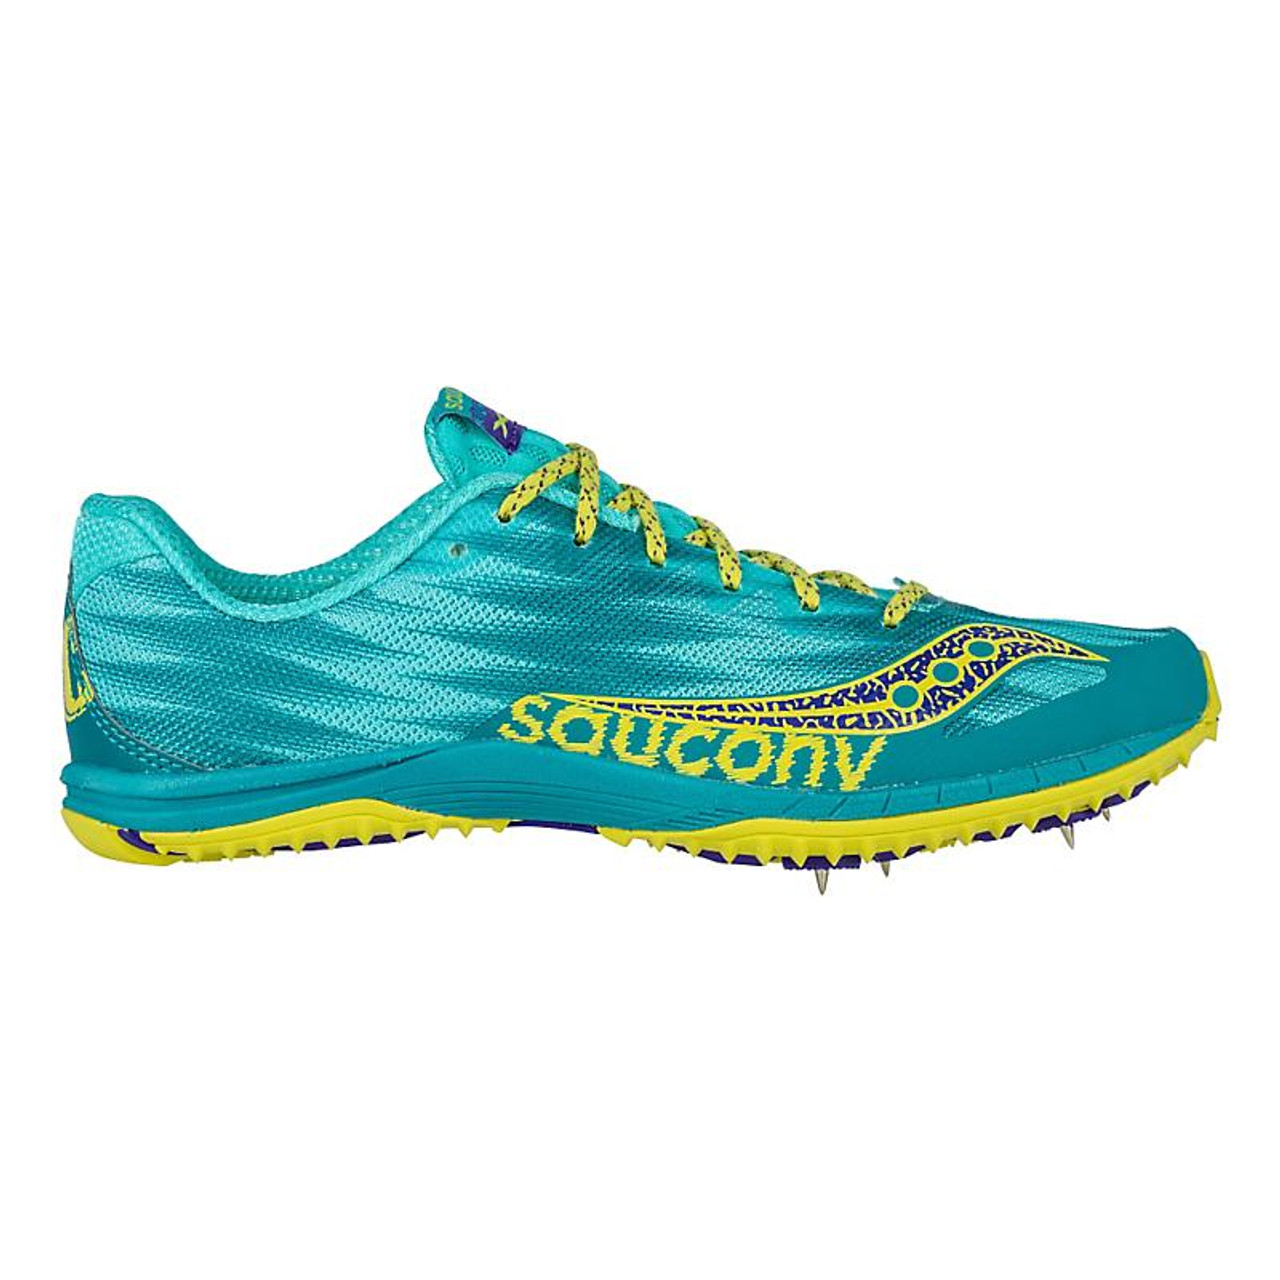 saucony xc spikes womens